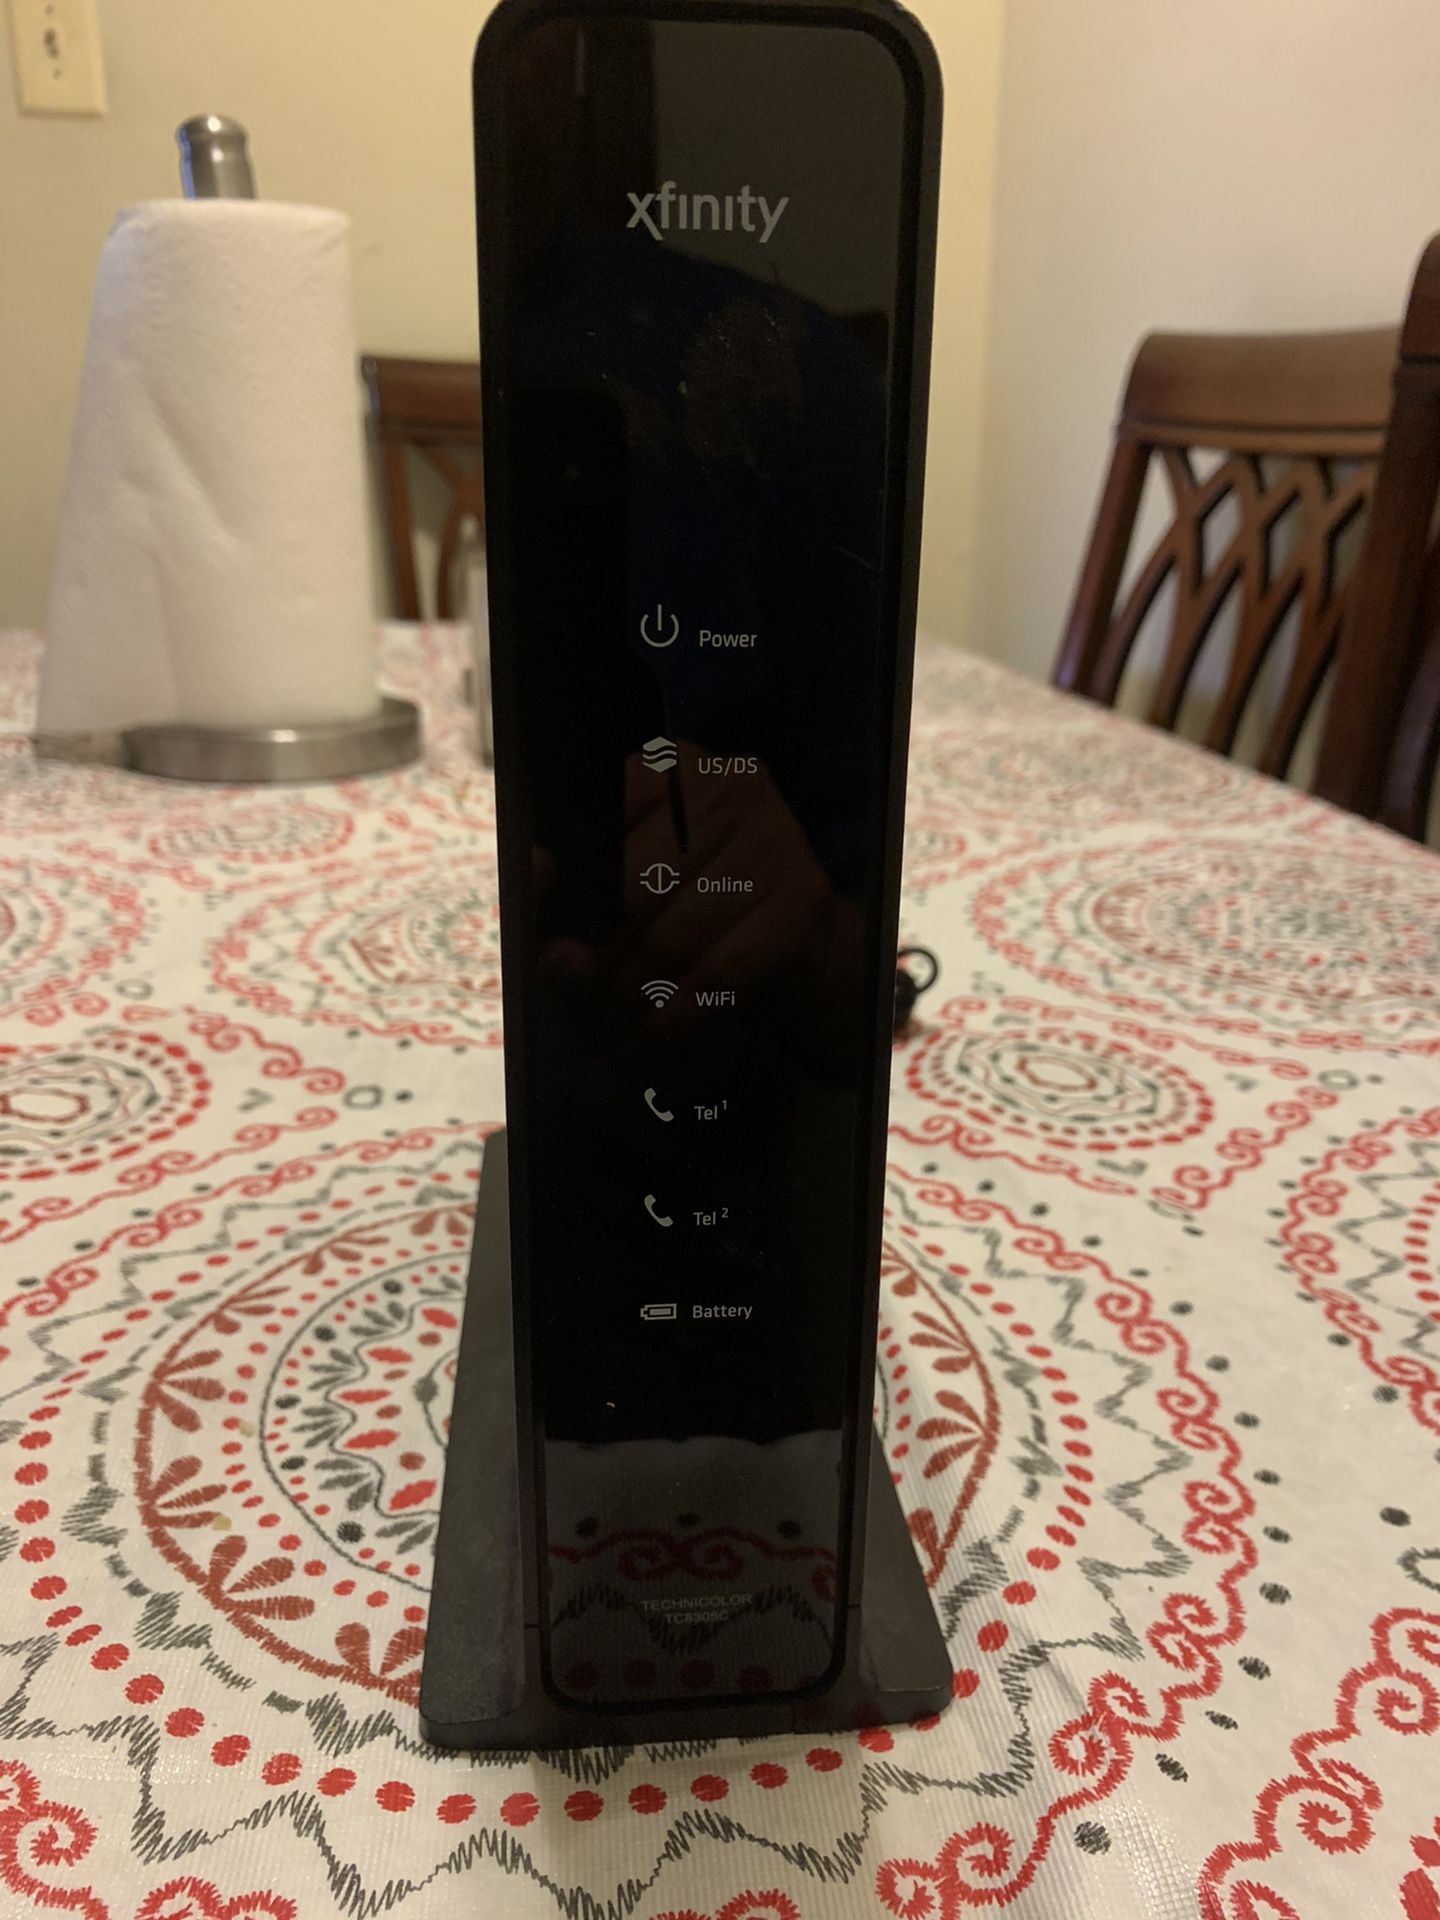 Xfinity cable modem Router